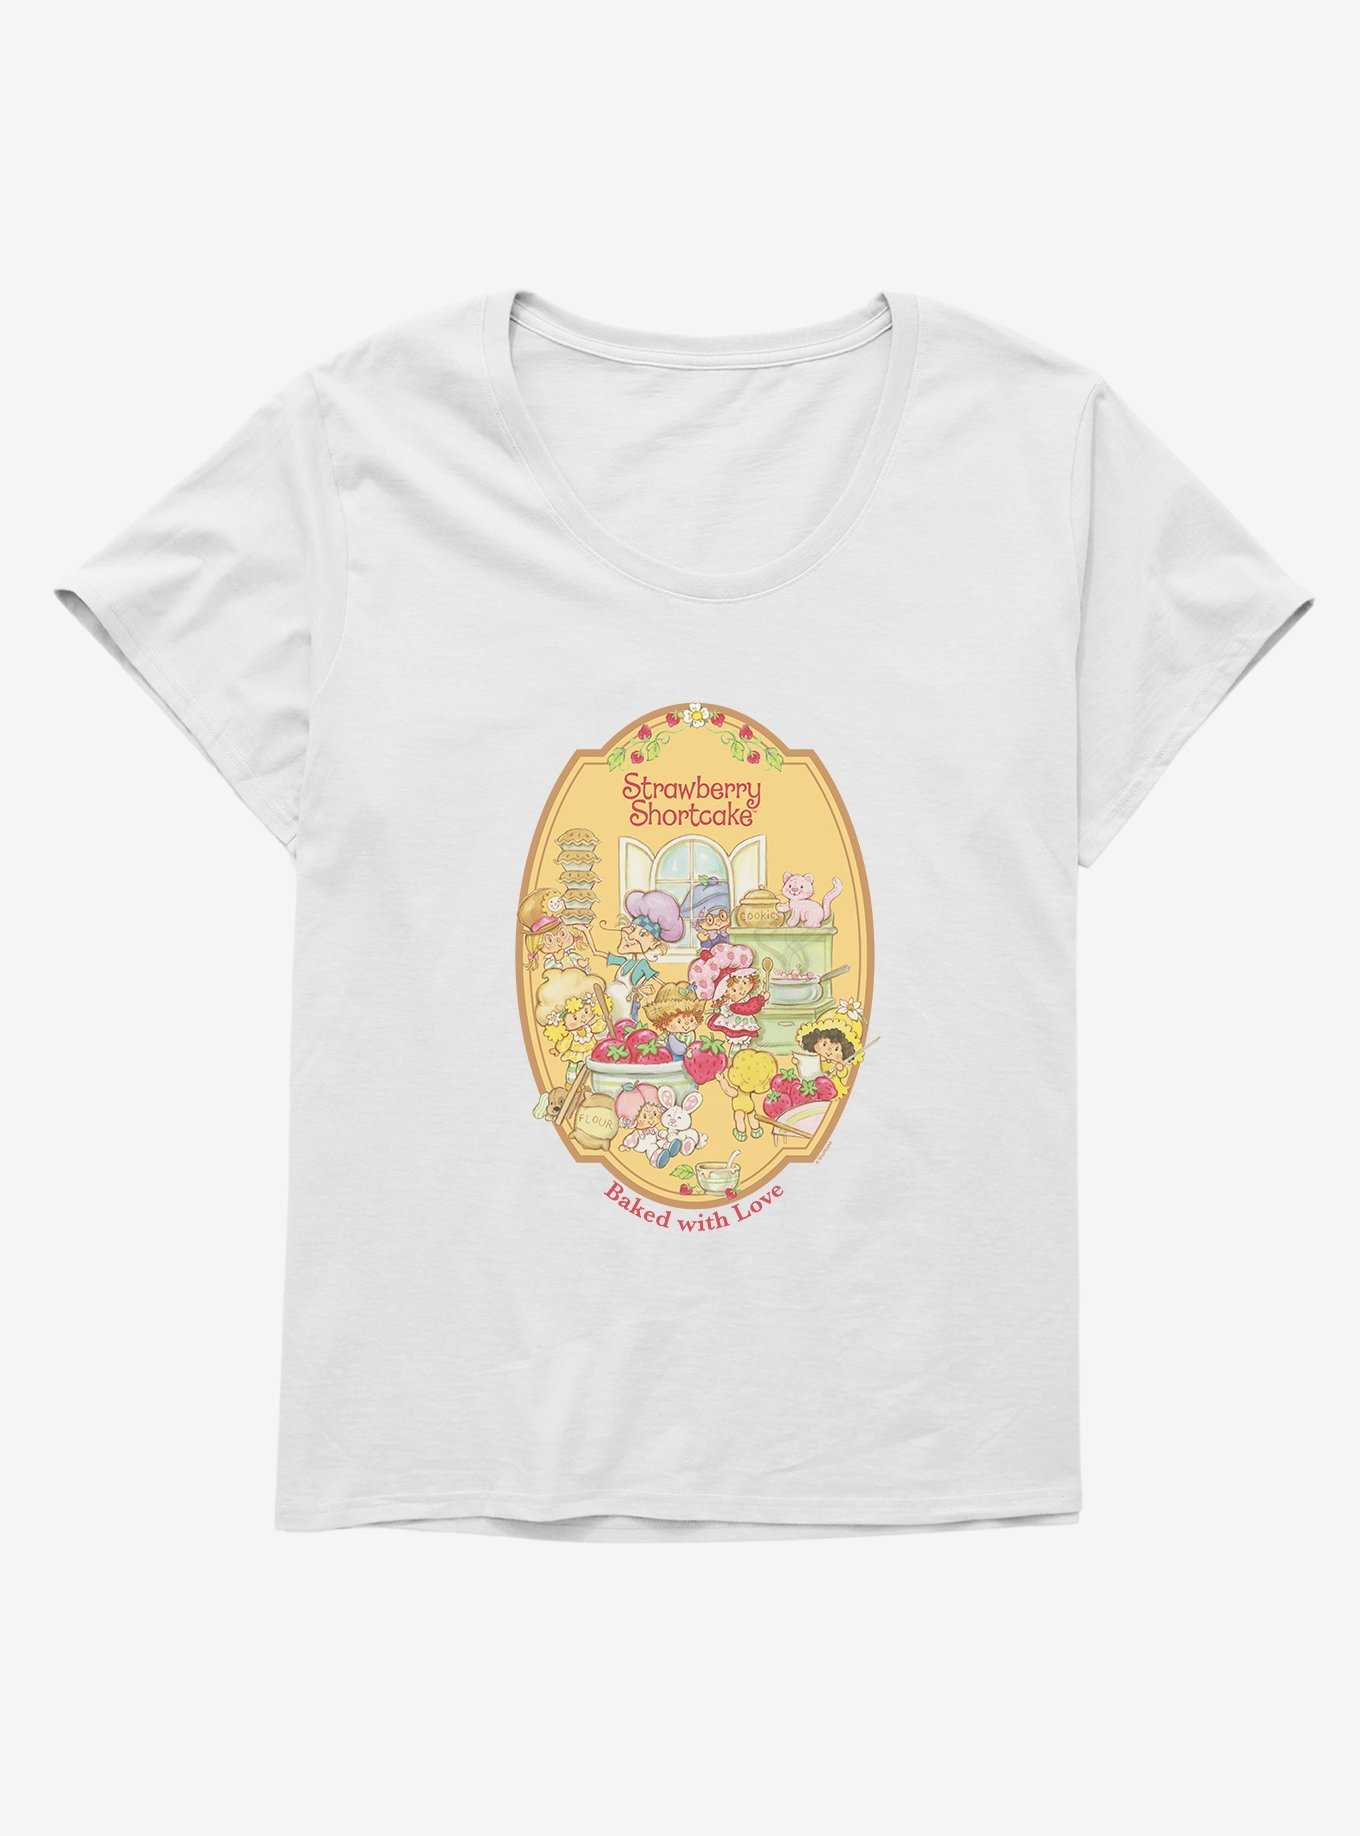 Strawberry Shortcake Baked With Love Womens T-Shirt Plus Size, , hi-res